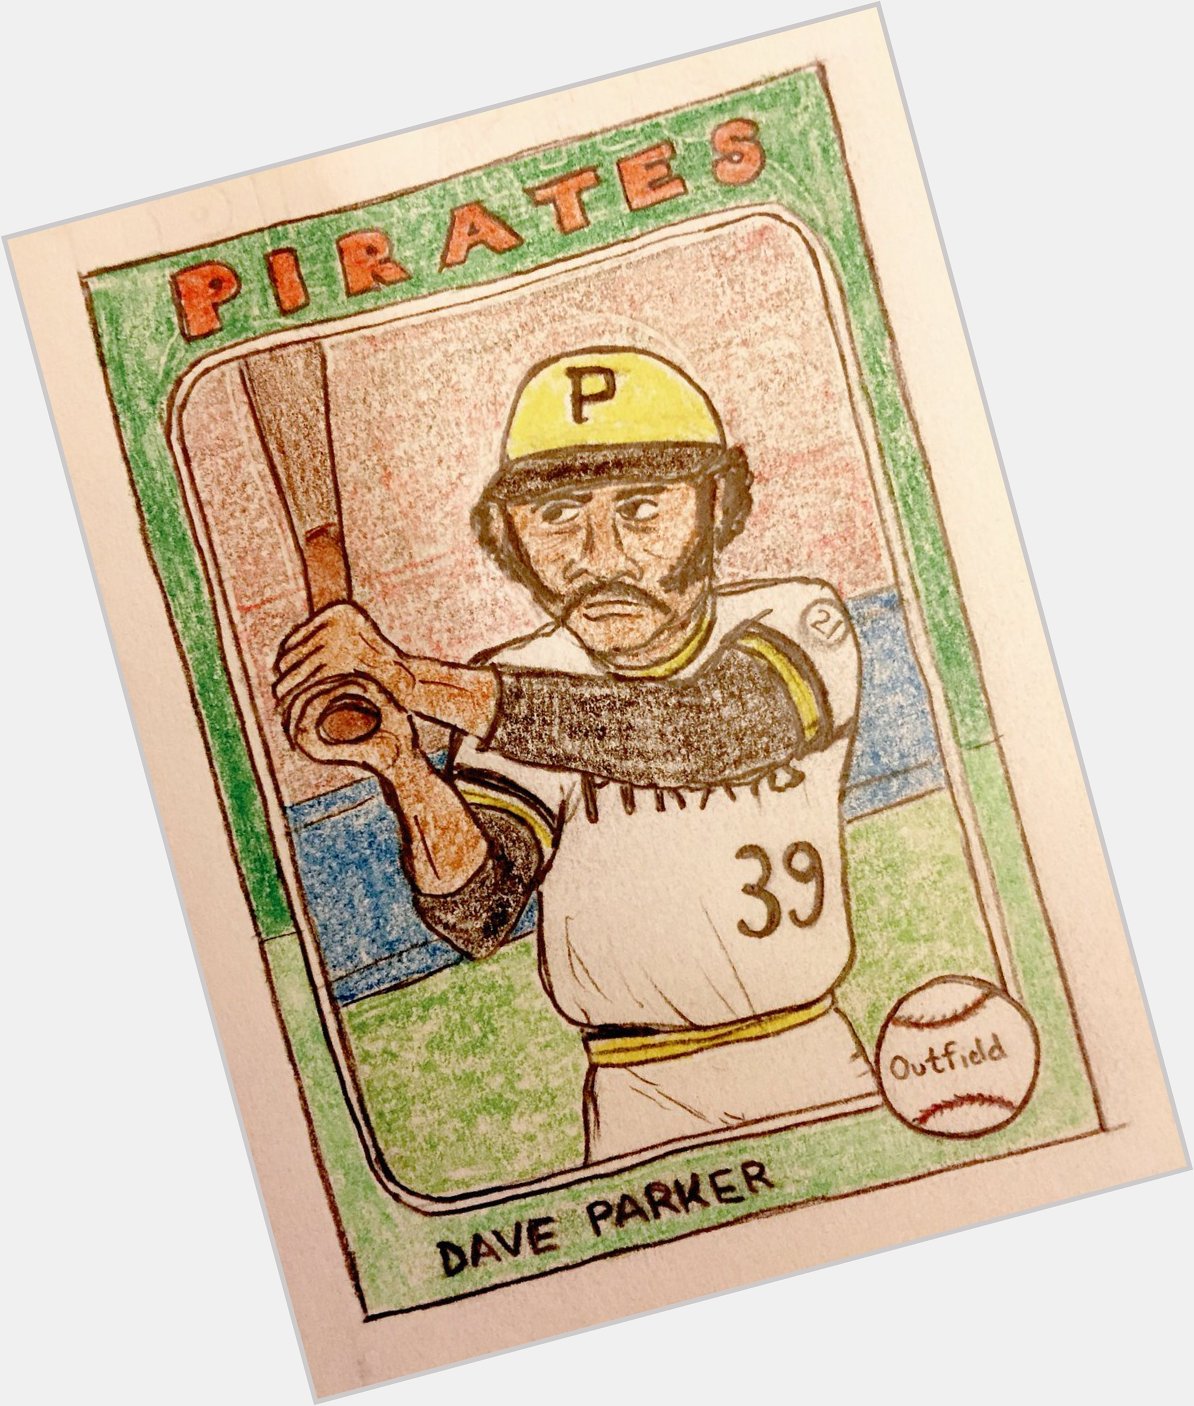 Wishing a very happy 66th birthday to Dave Parker!     